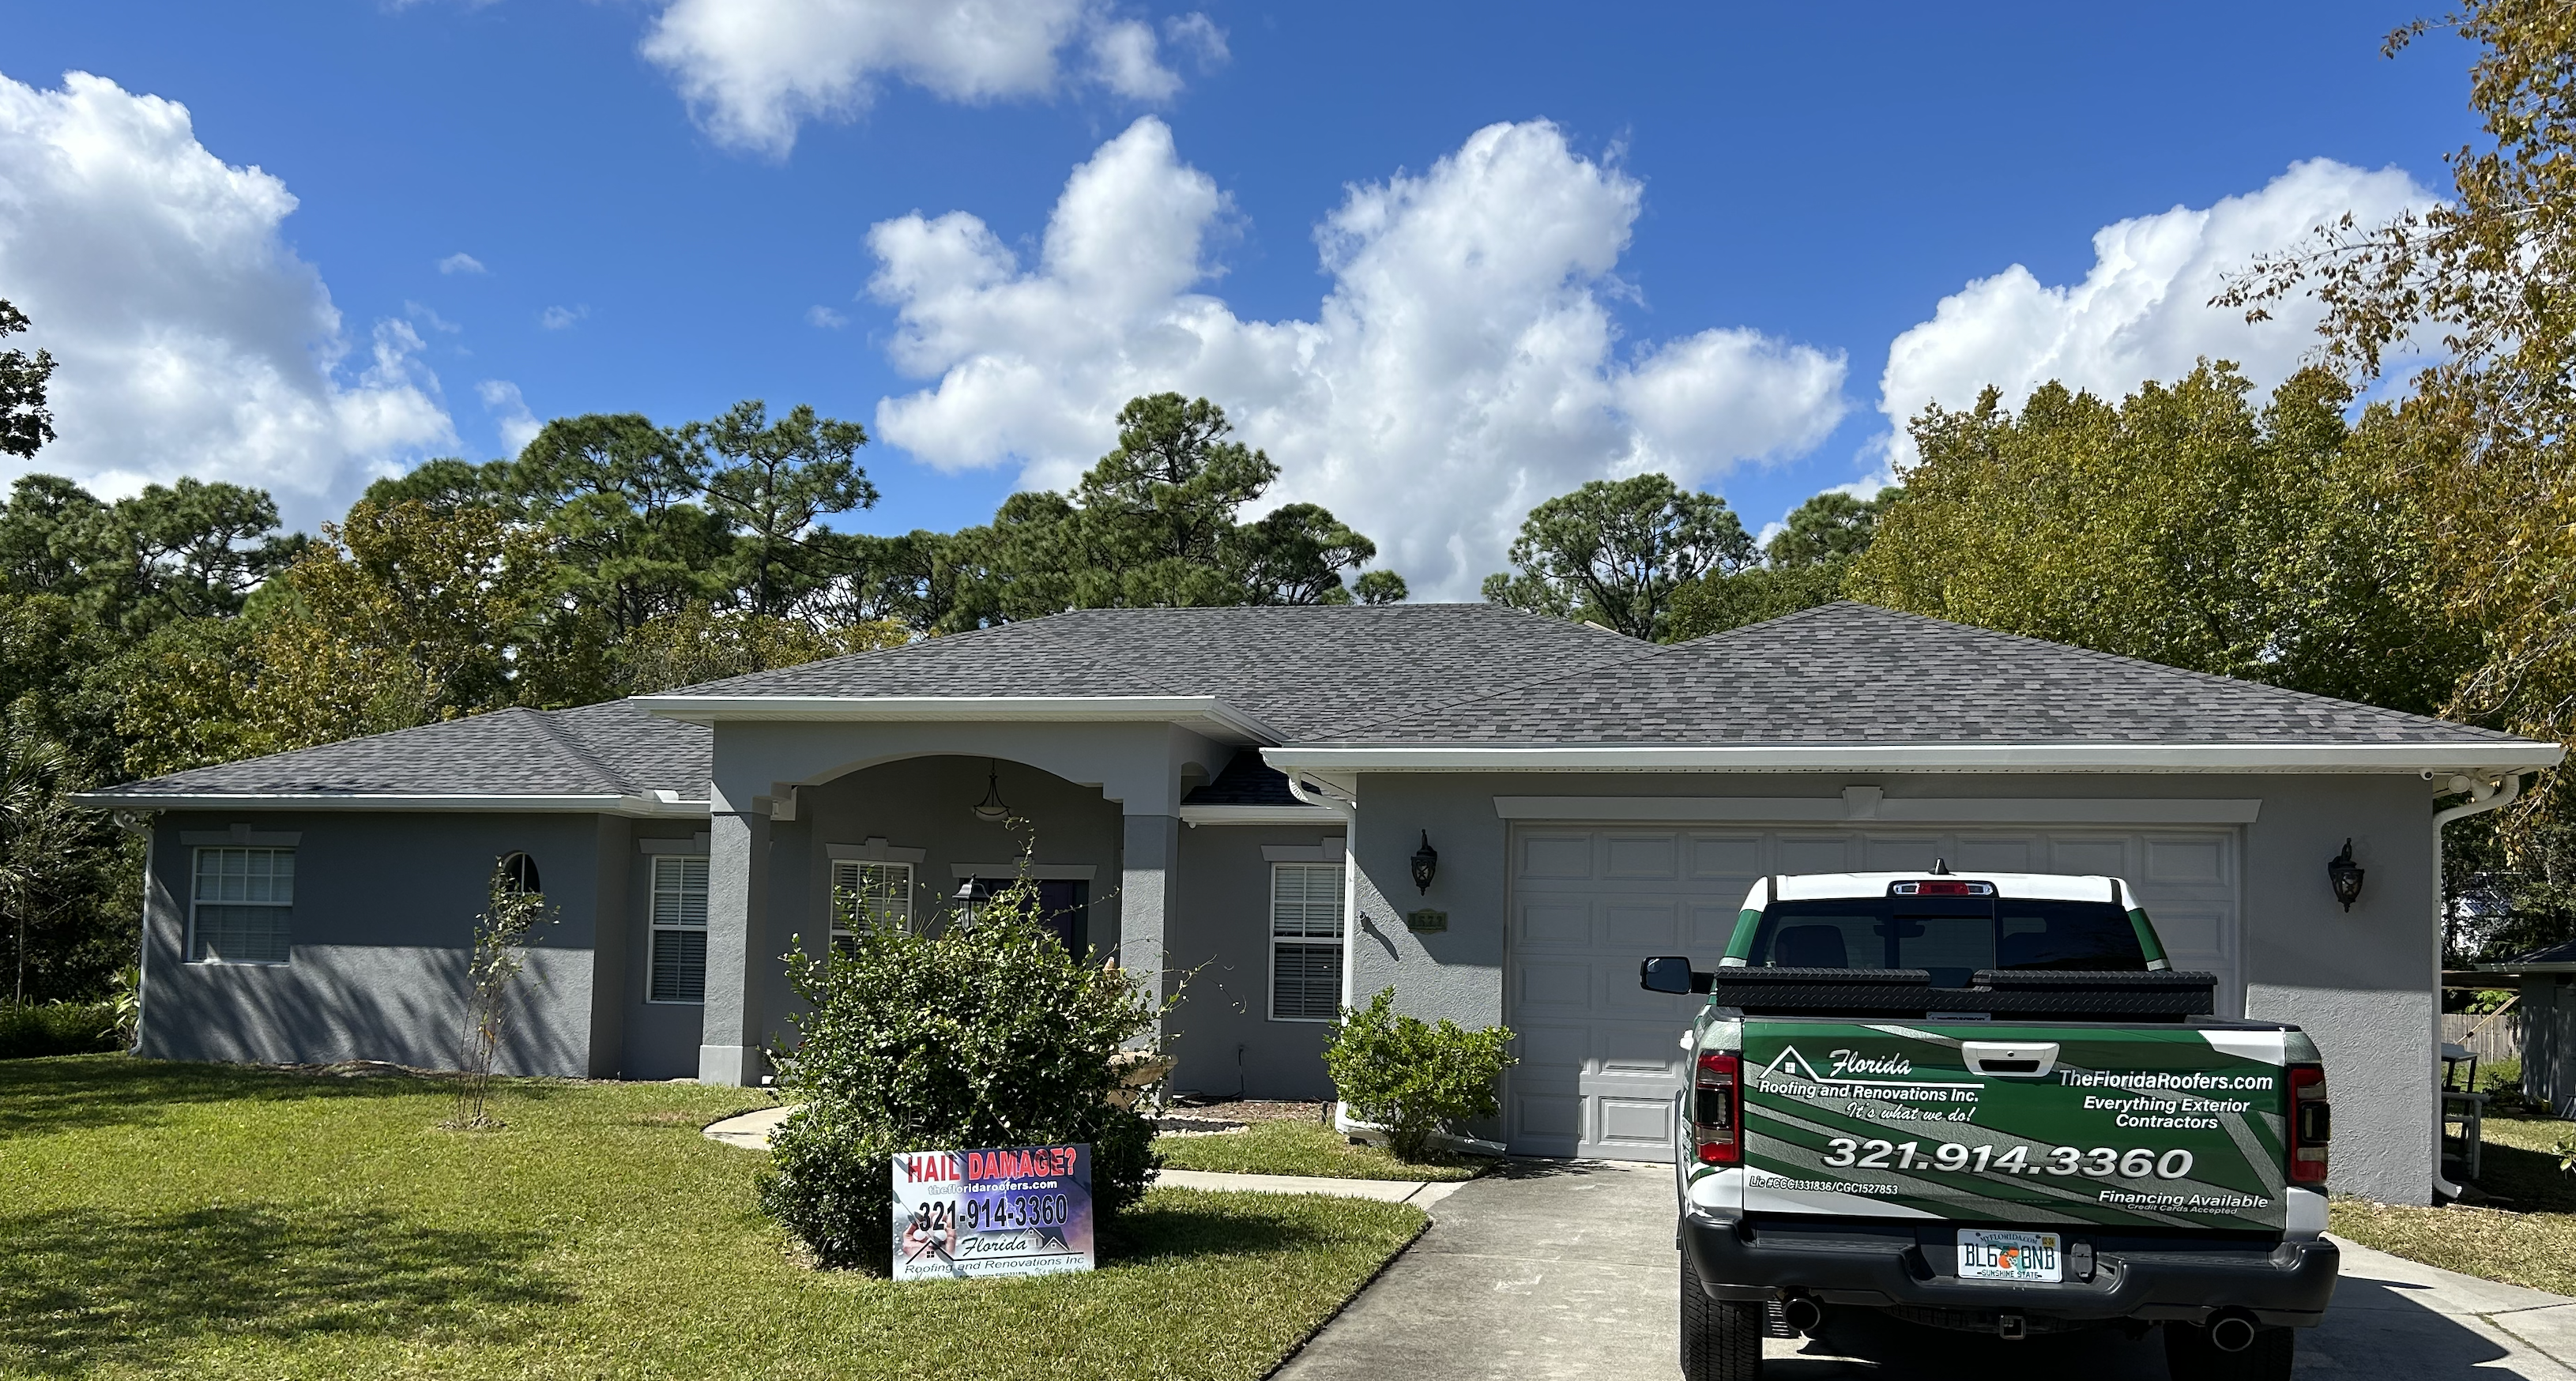 Florida Roofing and Renovations Inc of Palm Bay Florida